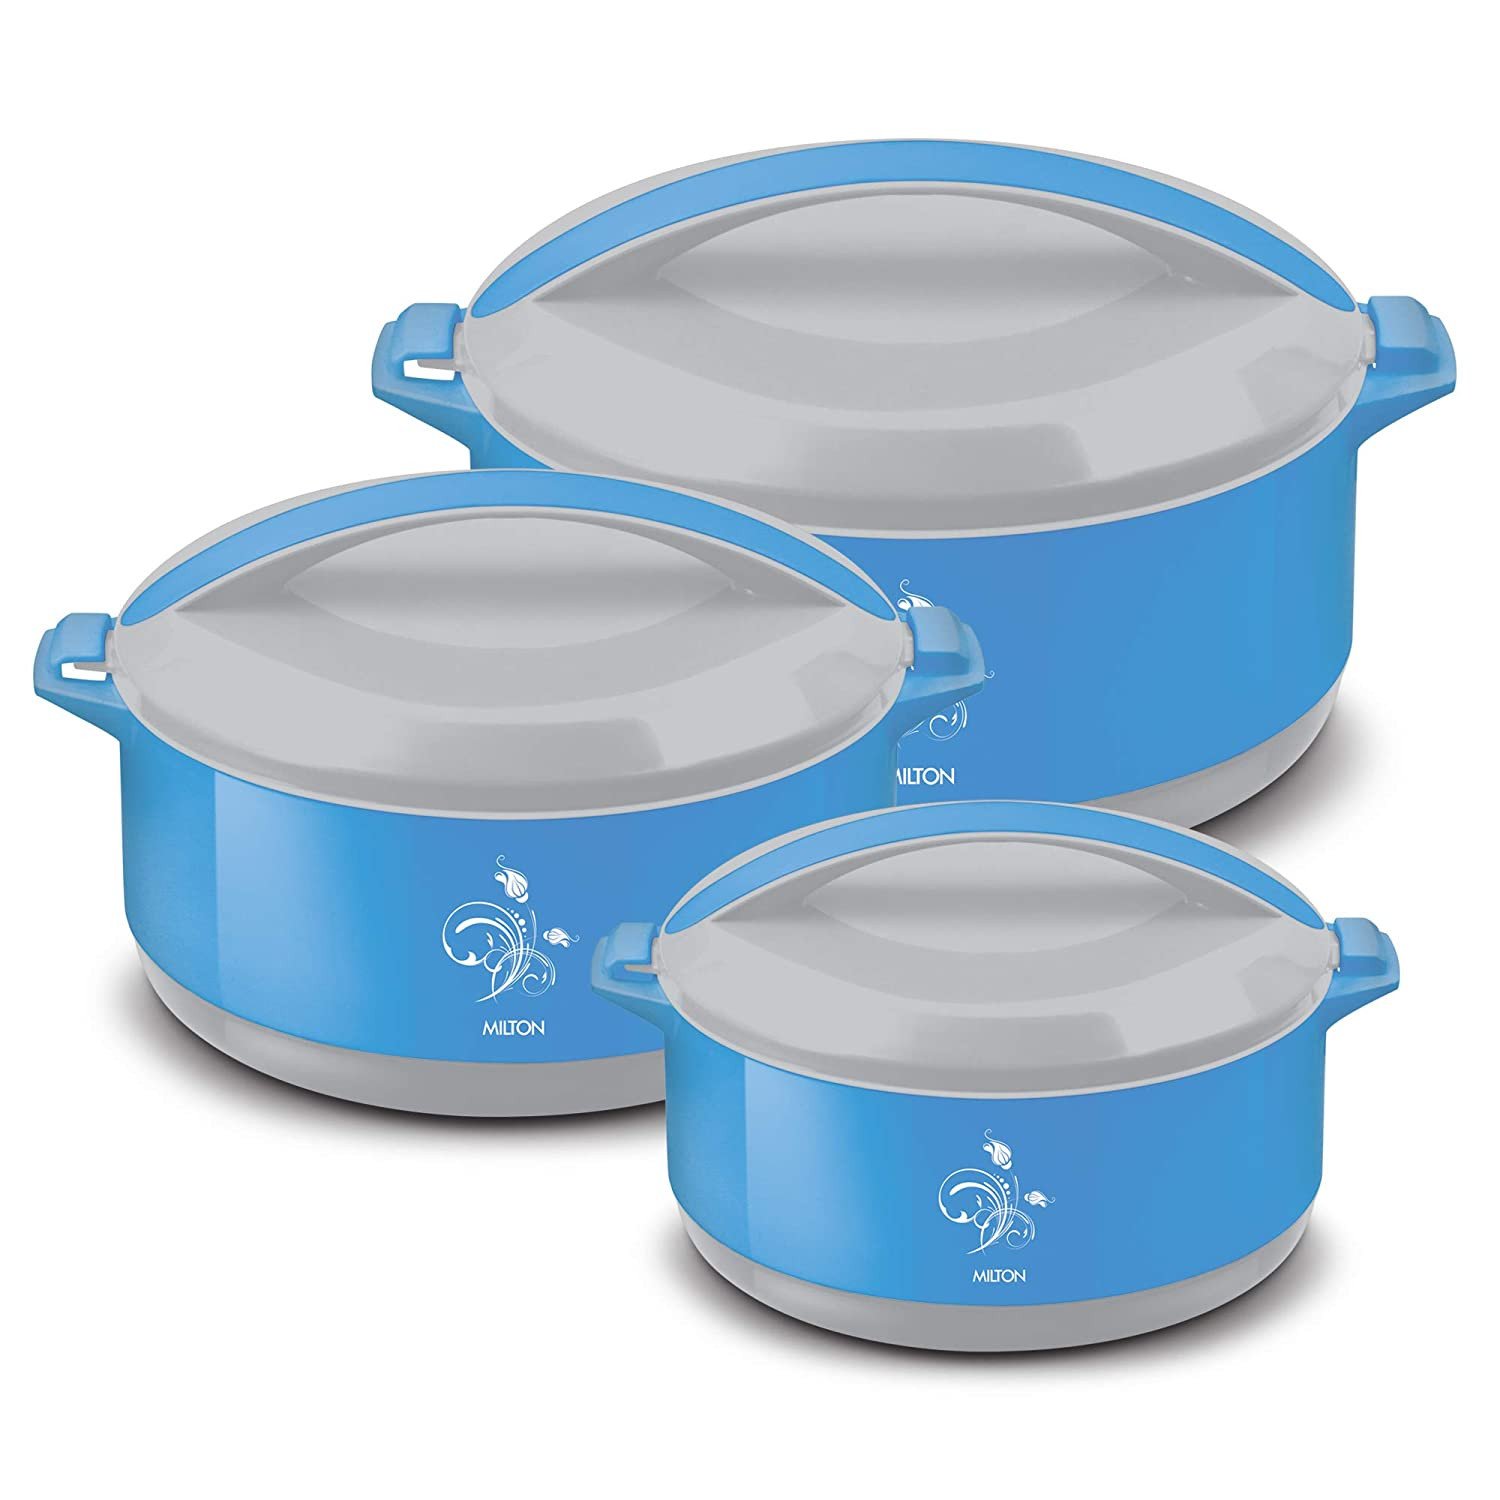 Buy Royal Insulated Casserole Online - Milton